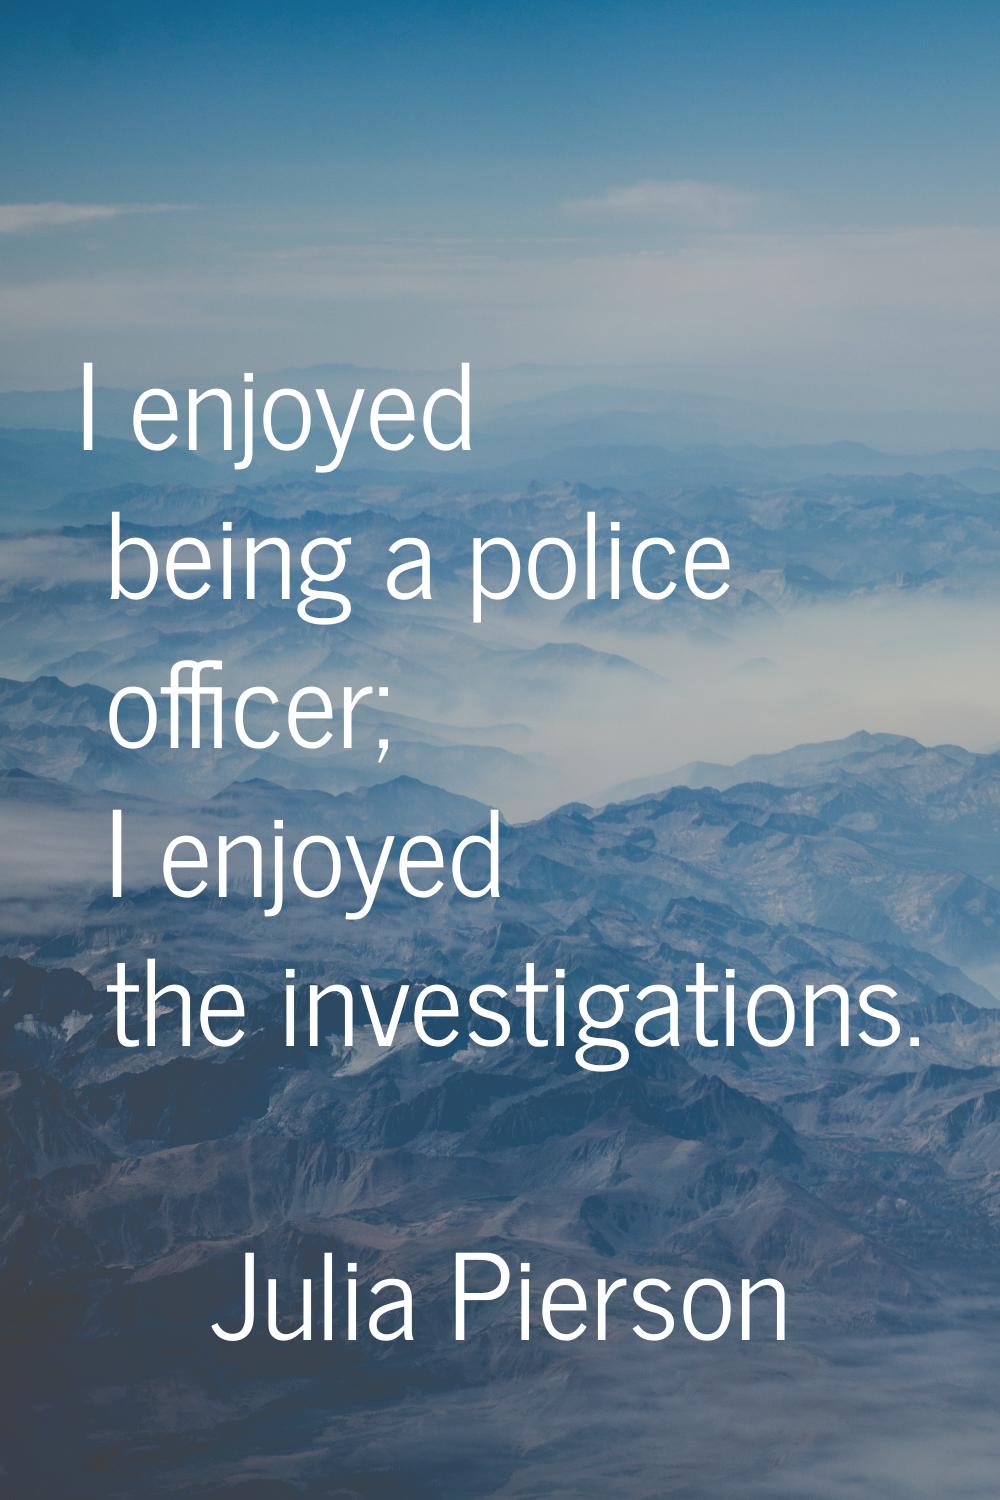 I enjoyed being a police officer; I enjoyed the investigations.